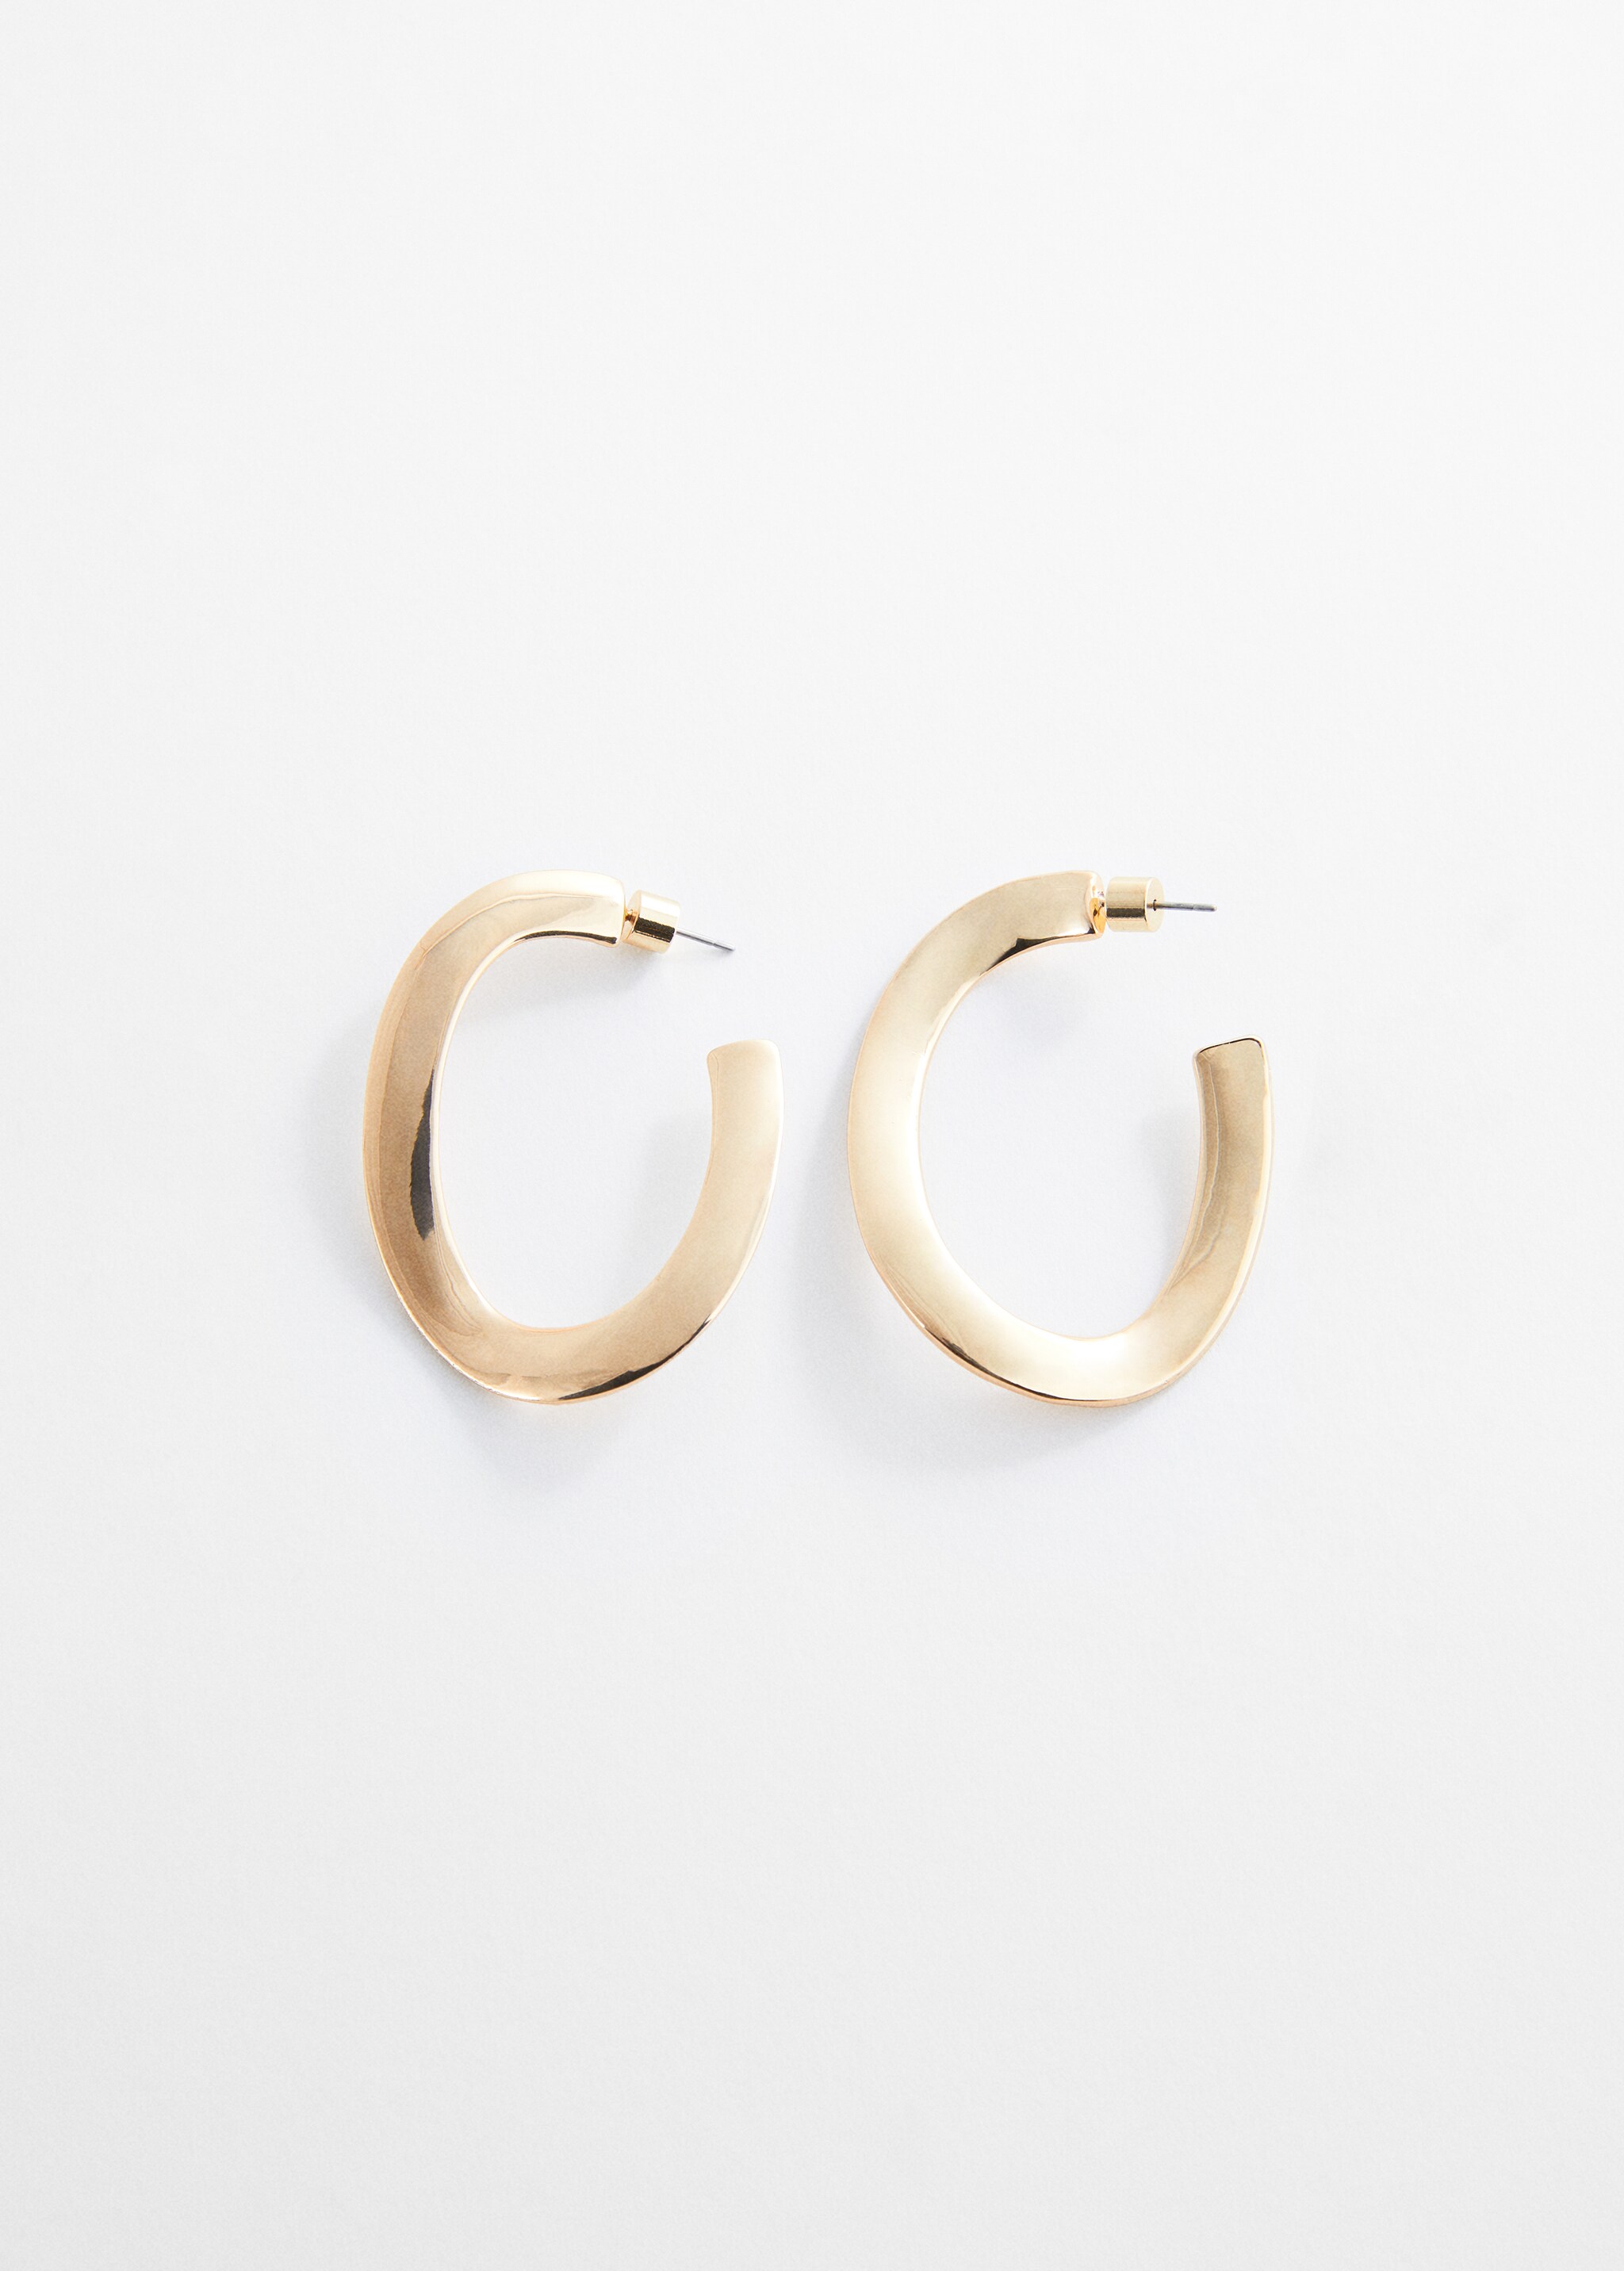 Twisted hoop earrings - Article without model